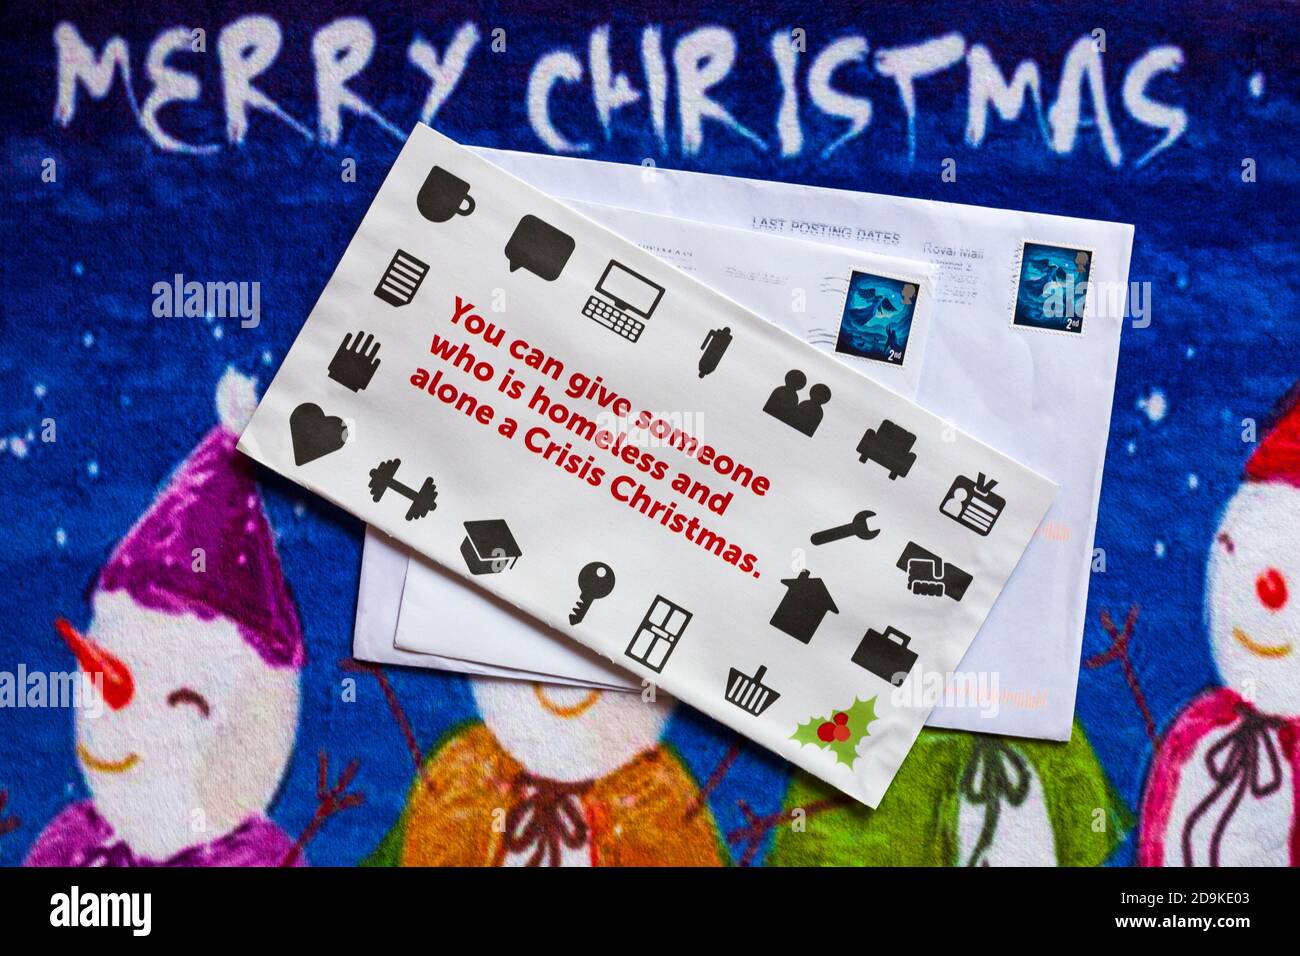 Post on Christmas mat - charity appeal, Crisis you can give someone who is homeless and alone a Crisis Christmas - Merry Christmas Stock Photo